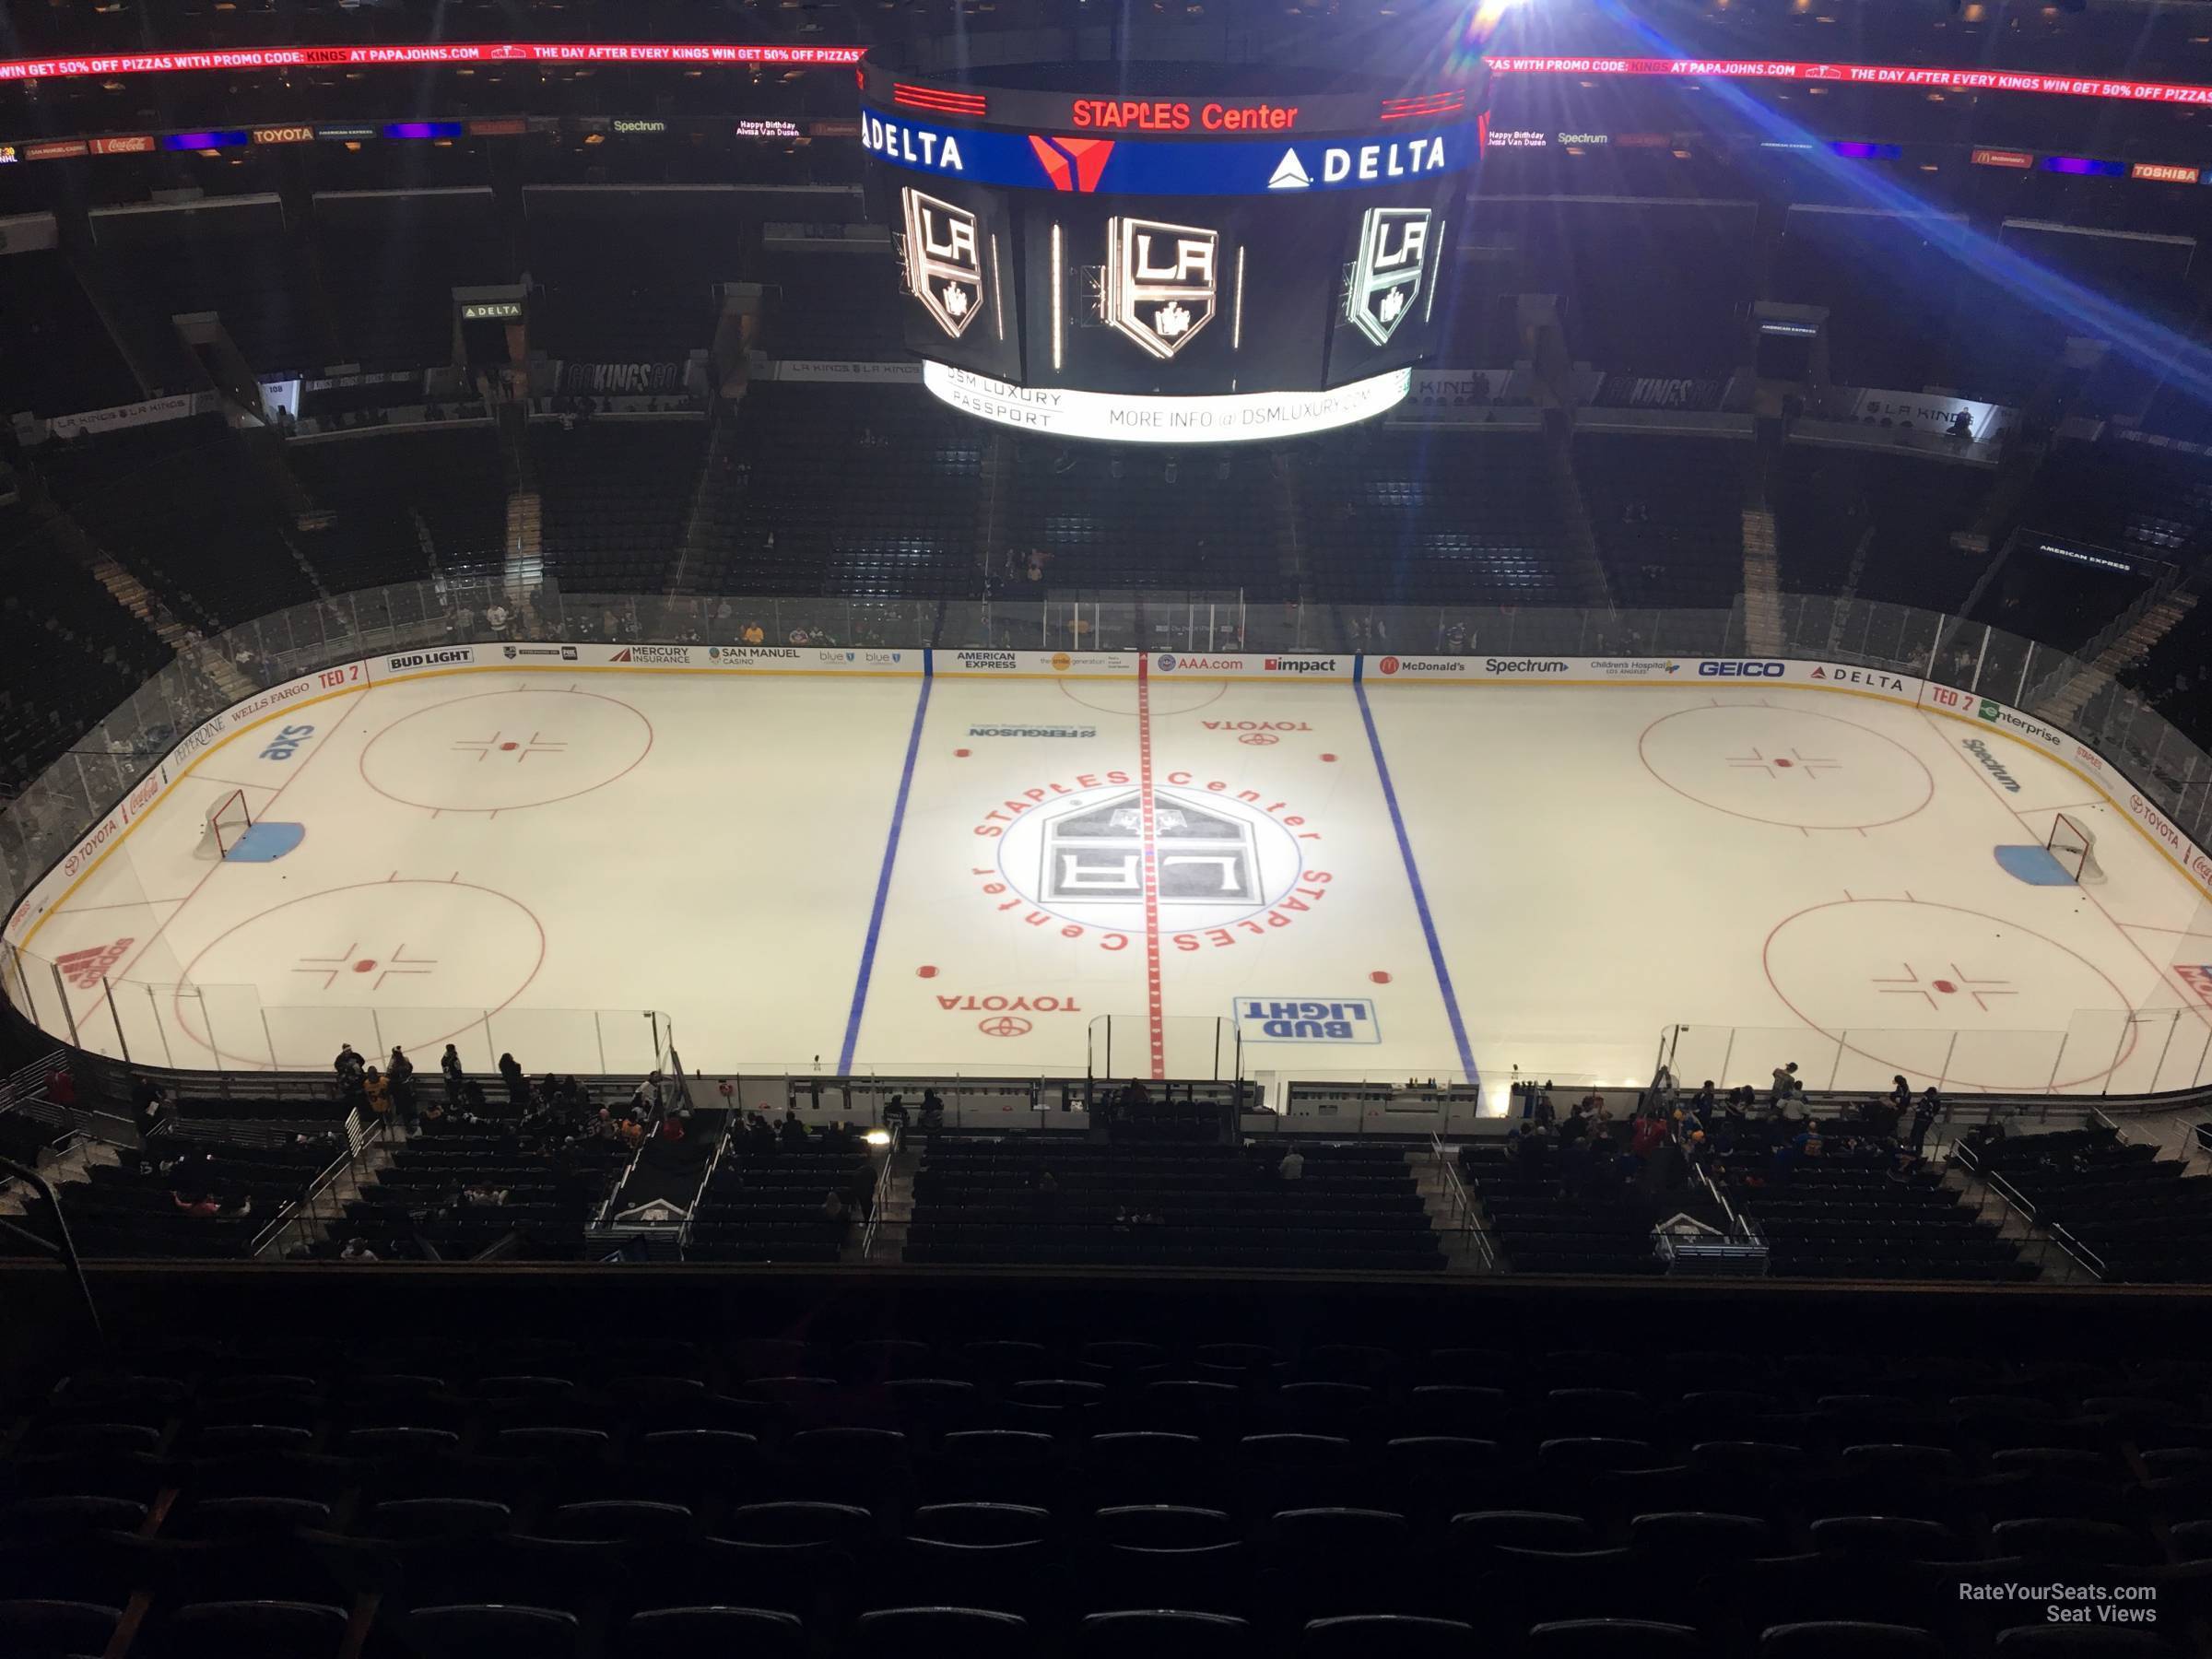 section 301, row 7 seat view  for hockey - crypto.com arena